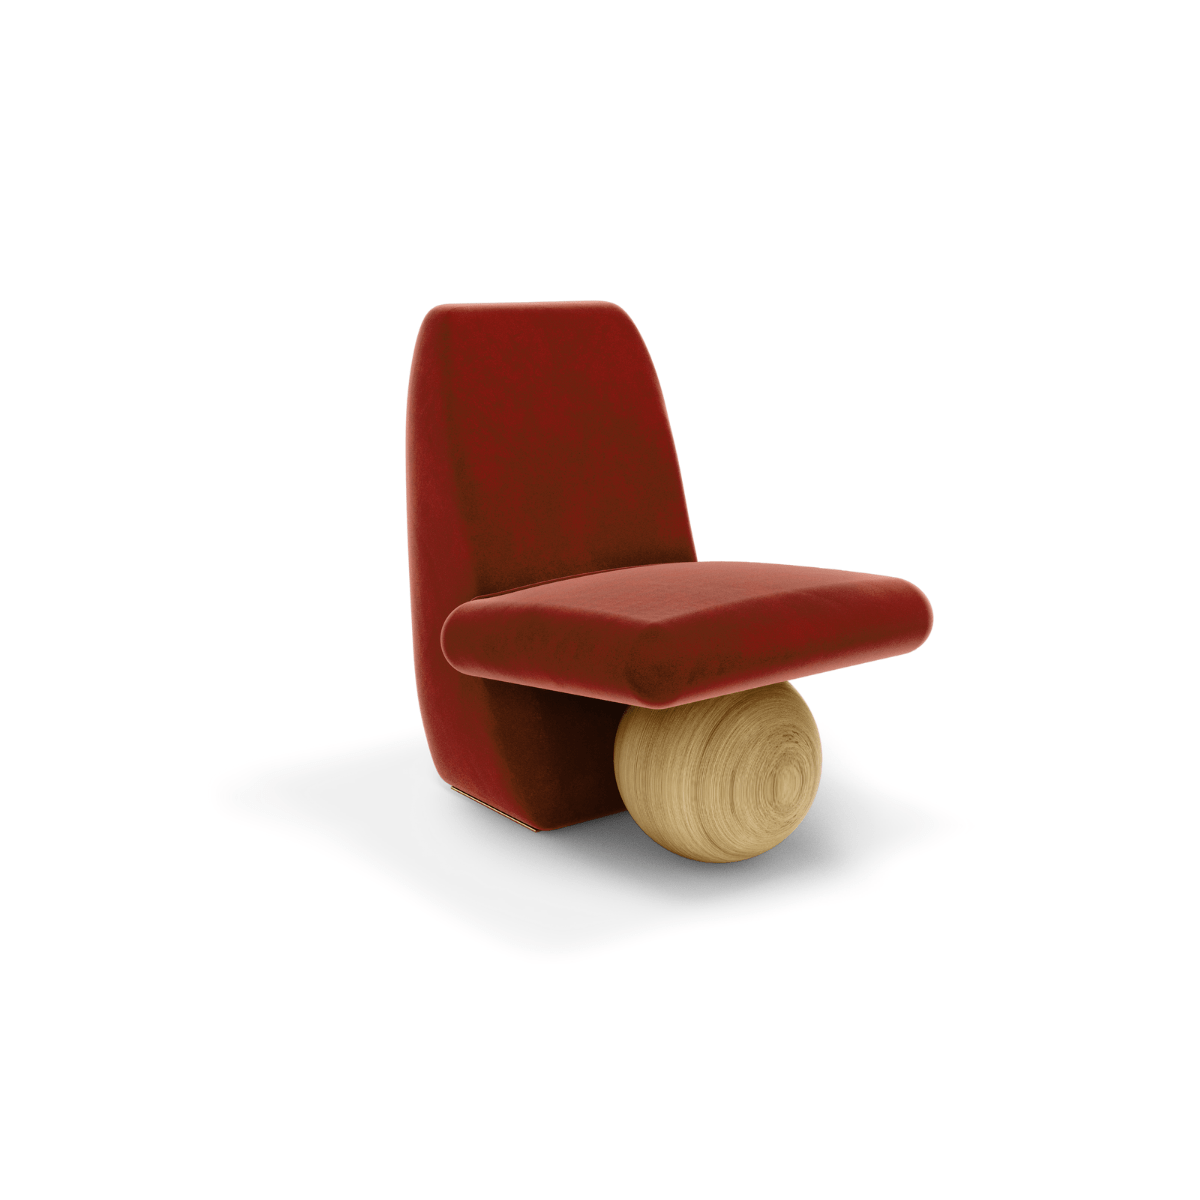 wooden ball chair round covet collection masquespacio COVET COLLECTION